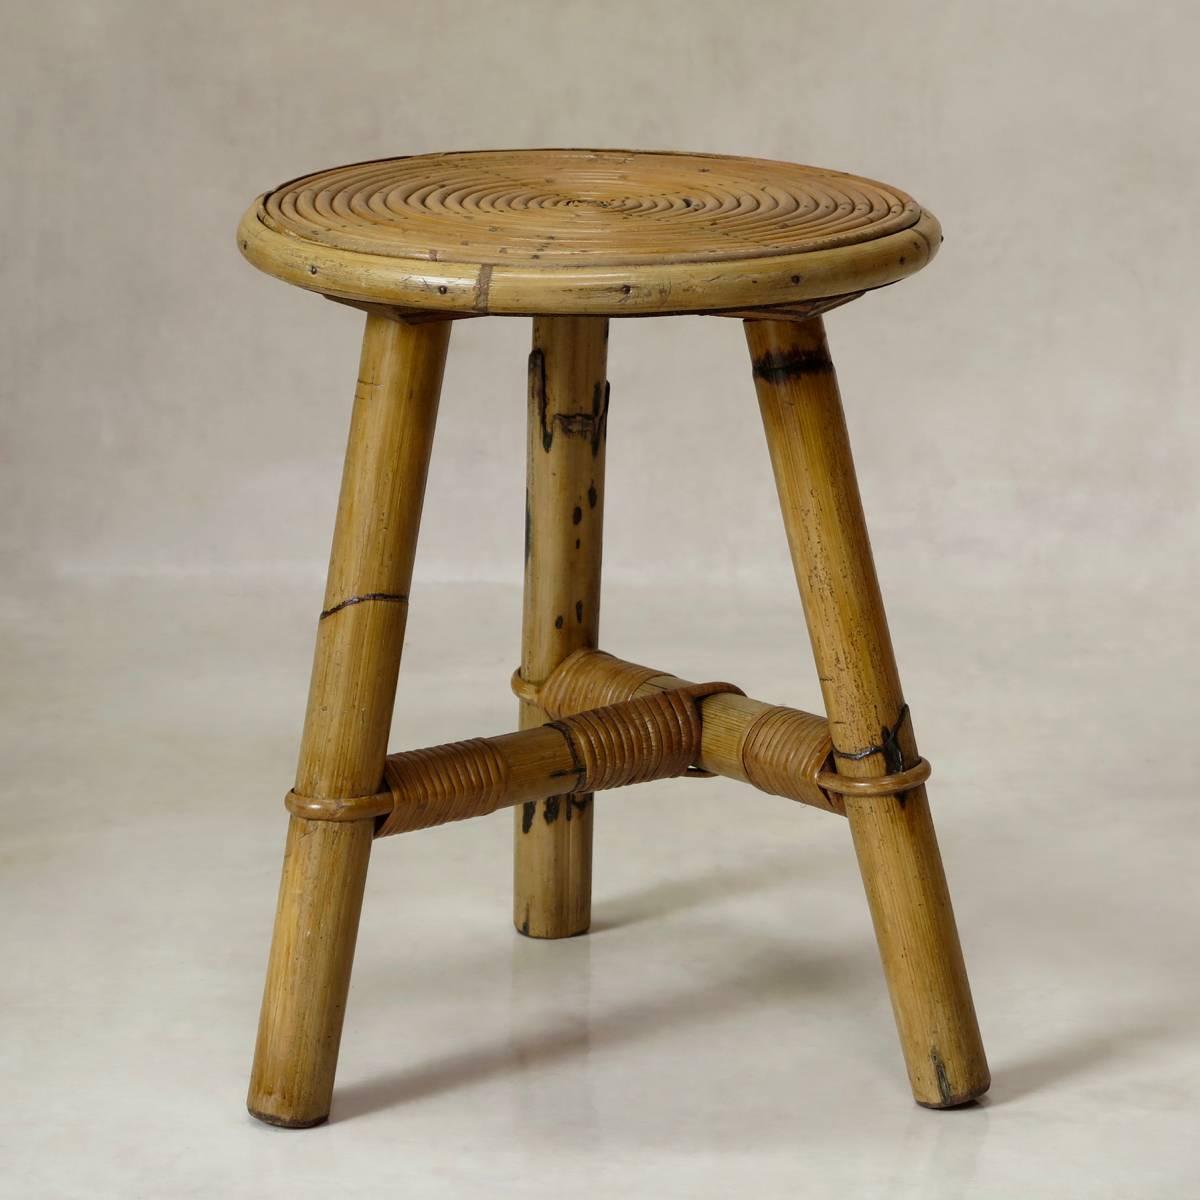 Pair of light, cane wicker tripod stools with unusual seats, running in concentric circles.

(Table also available).